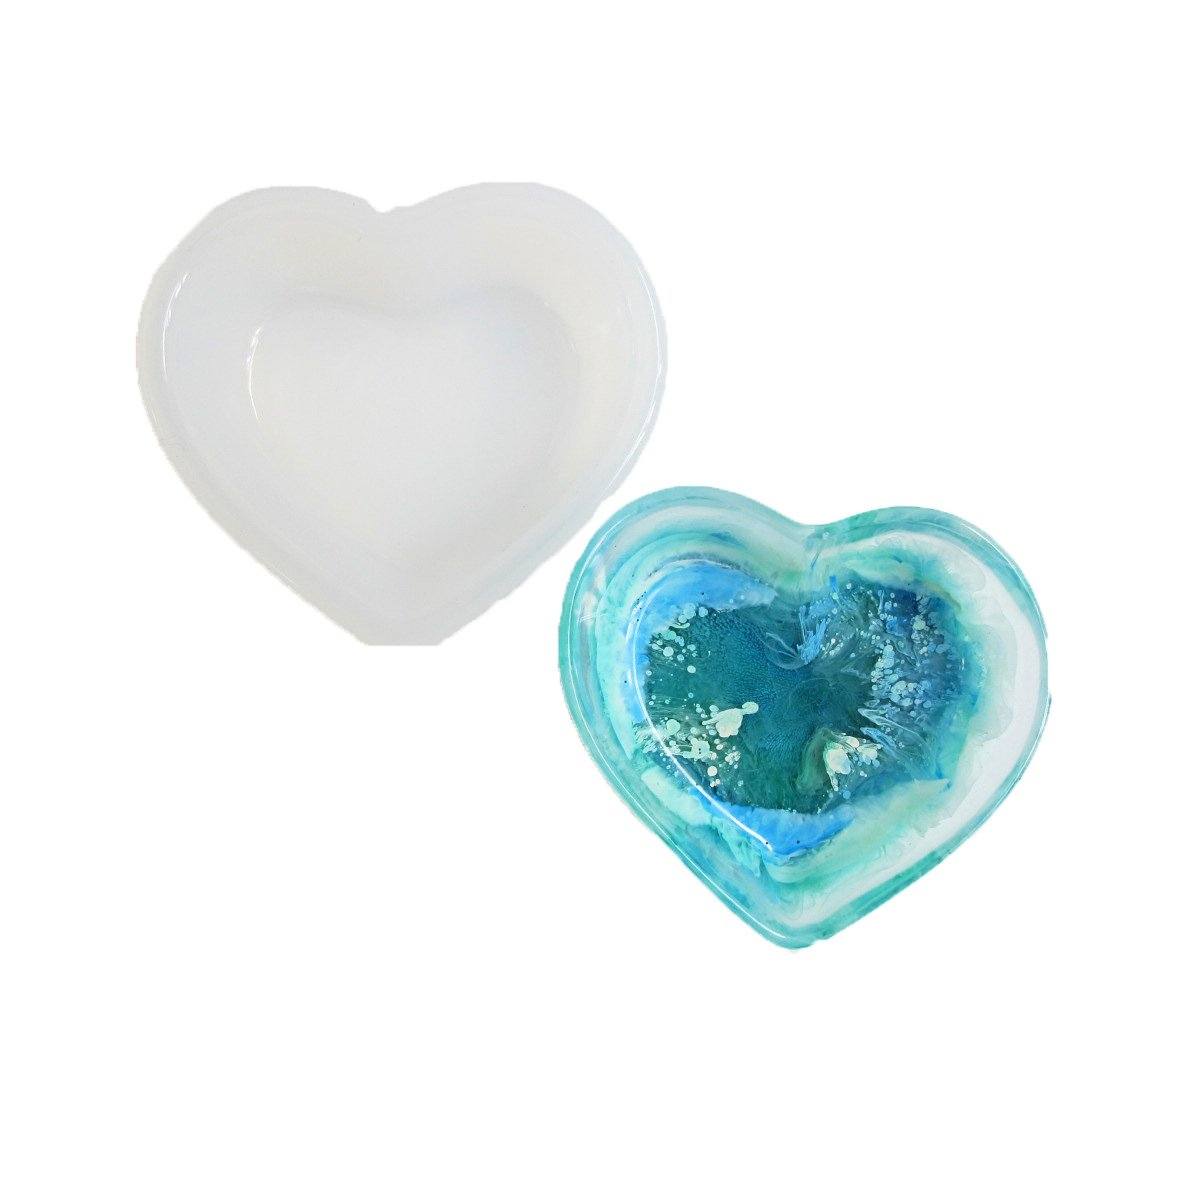 Smooth Rounded Heart Mold